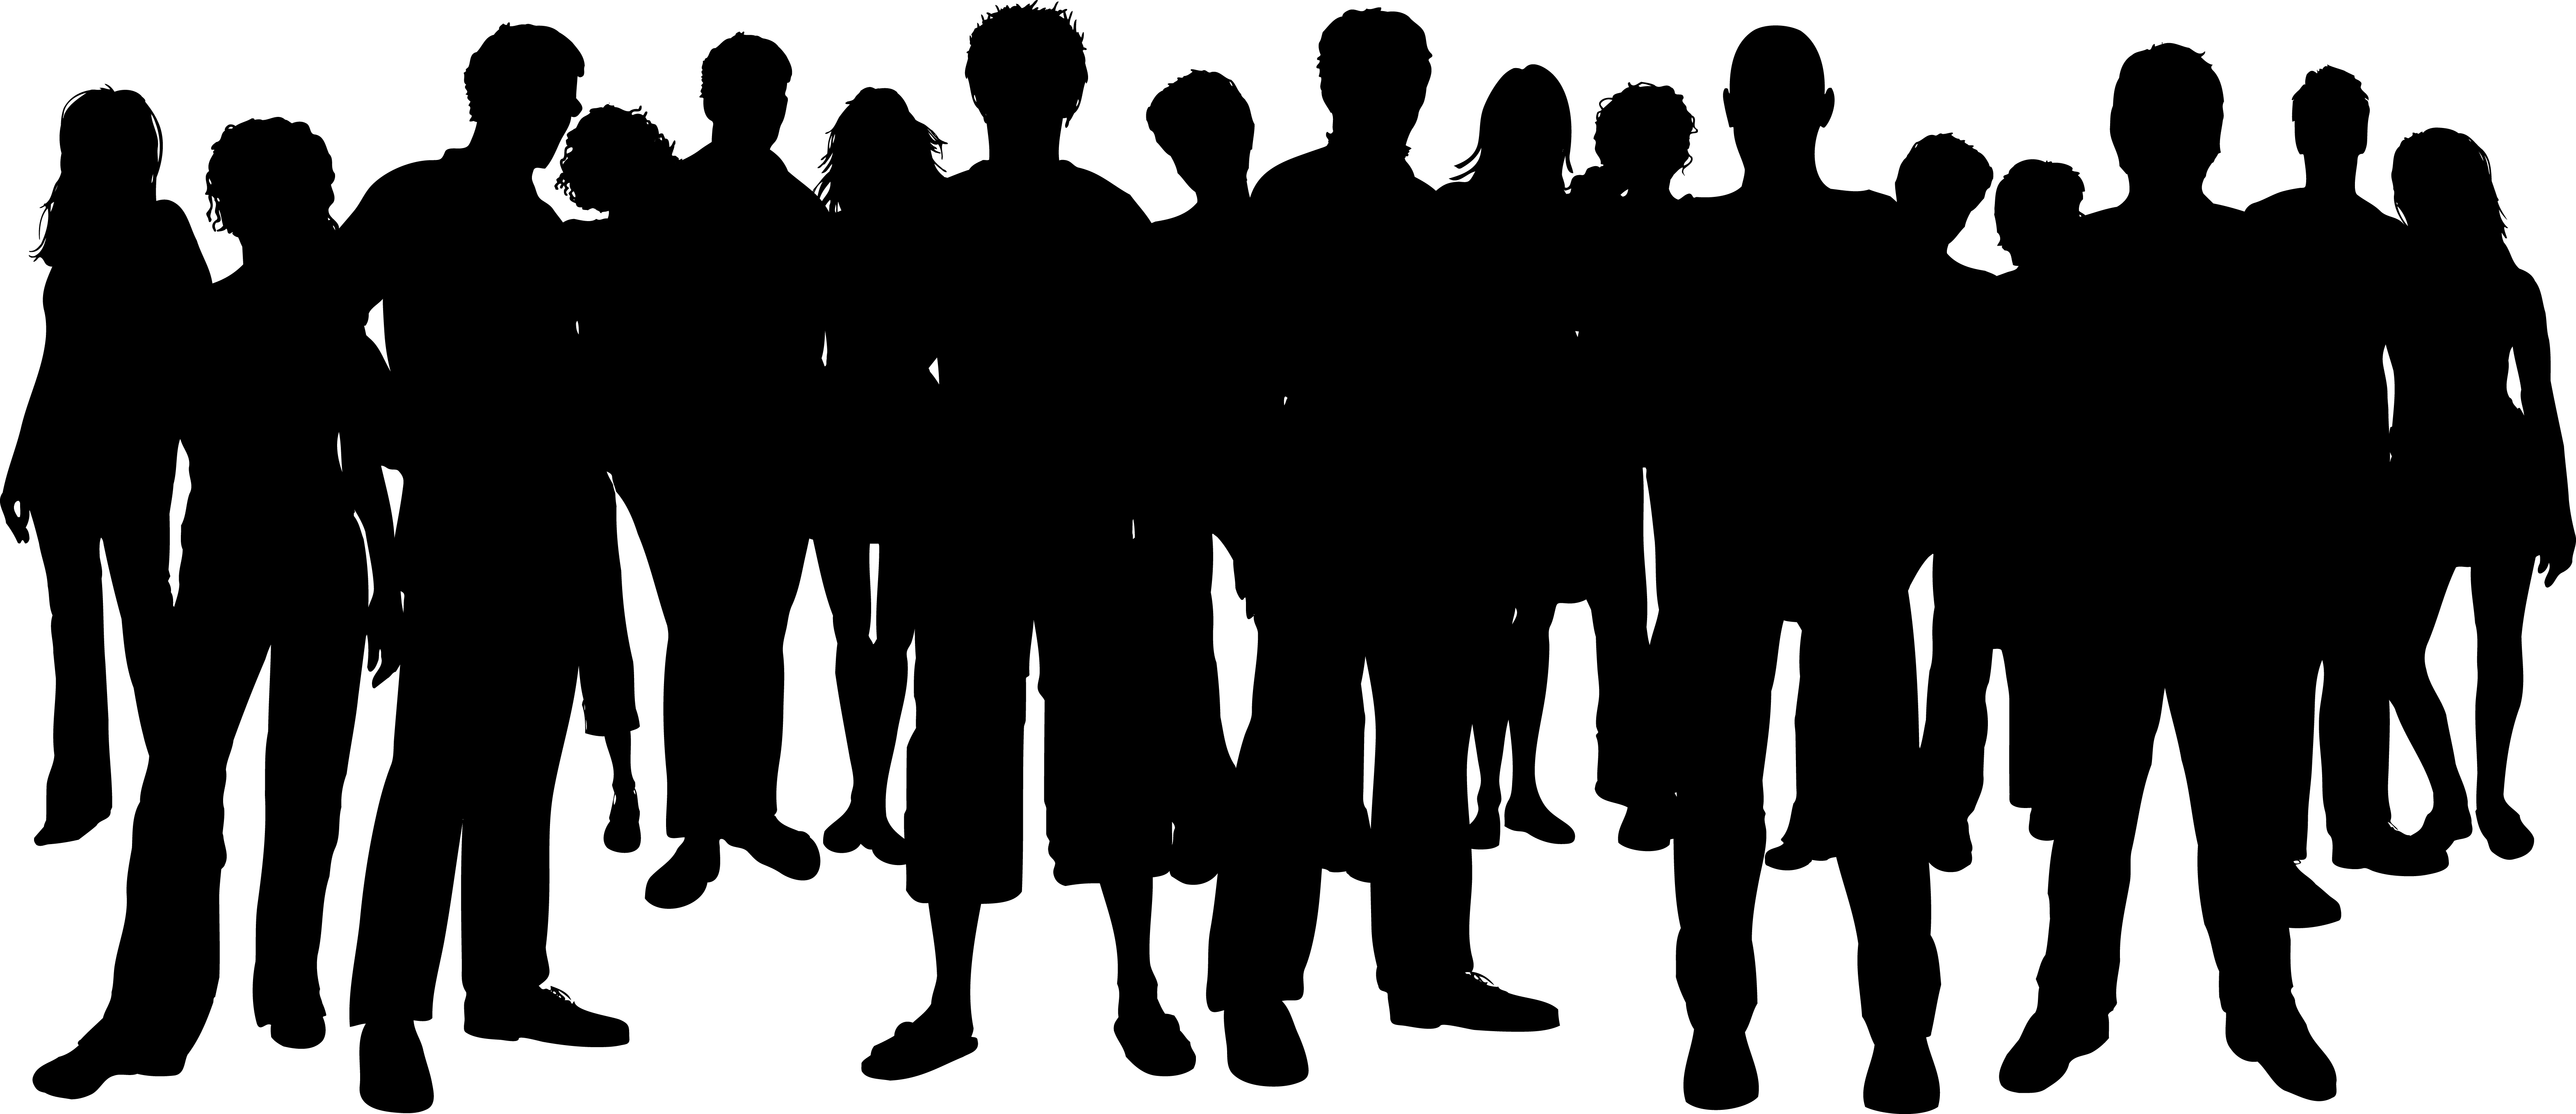 free clipart crowd silhouette - Clipground